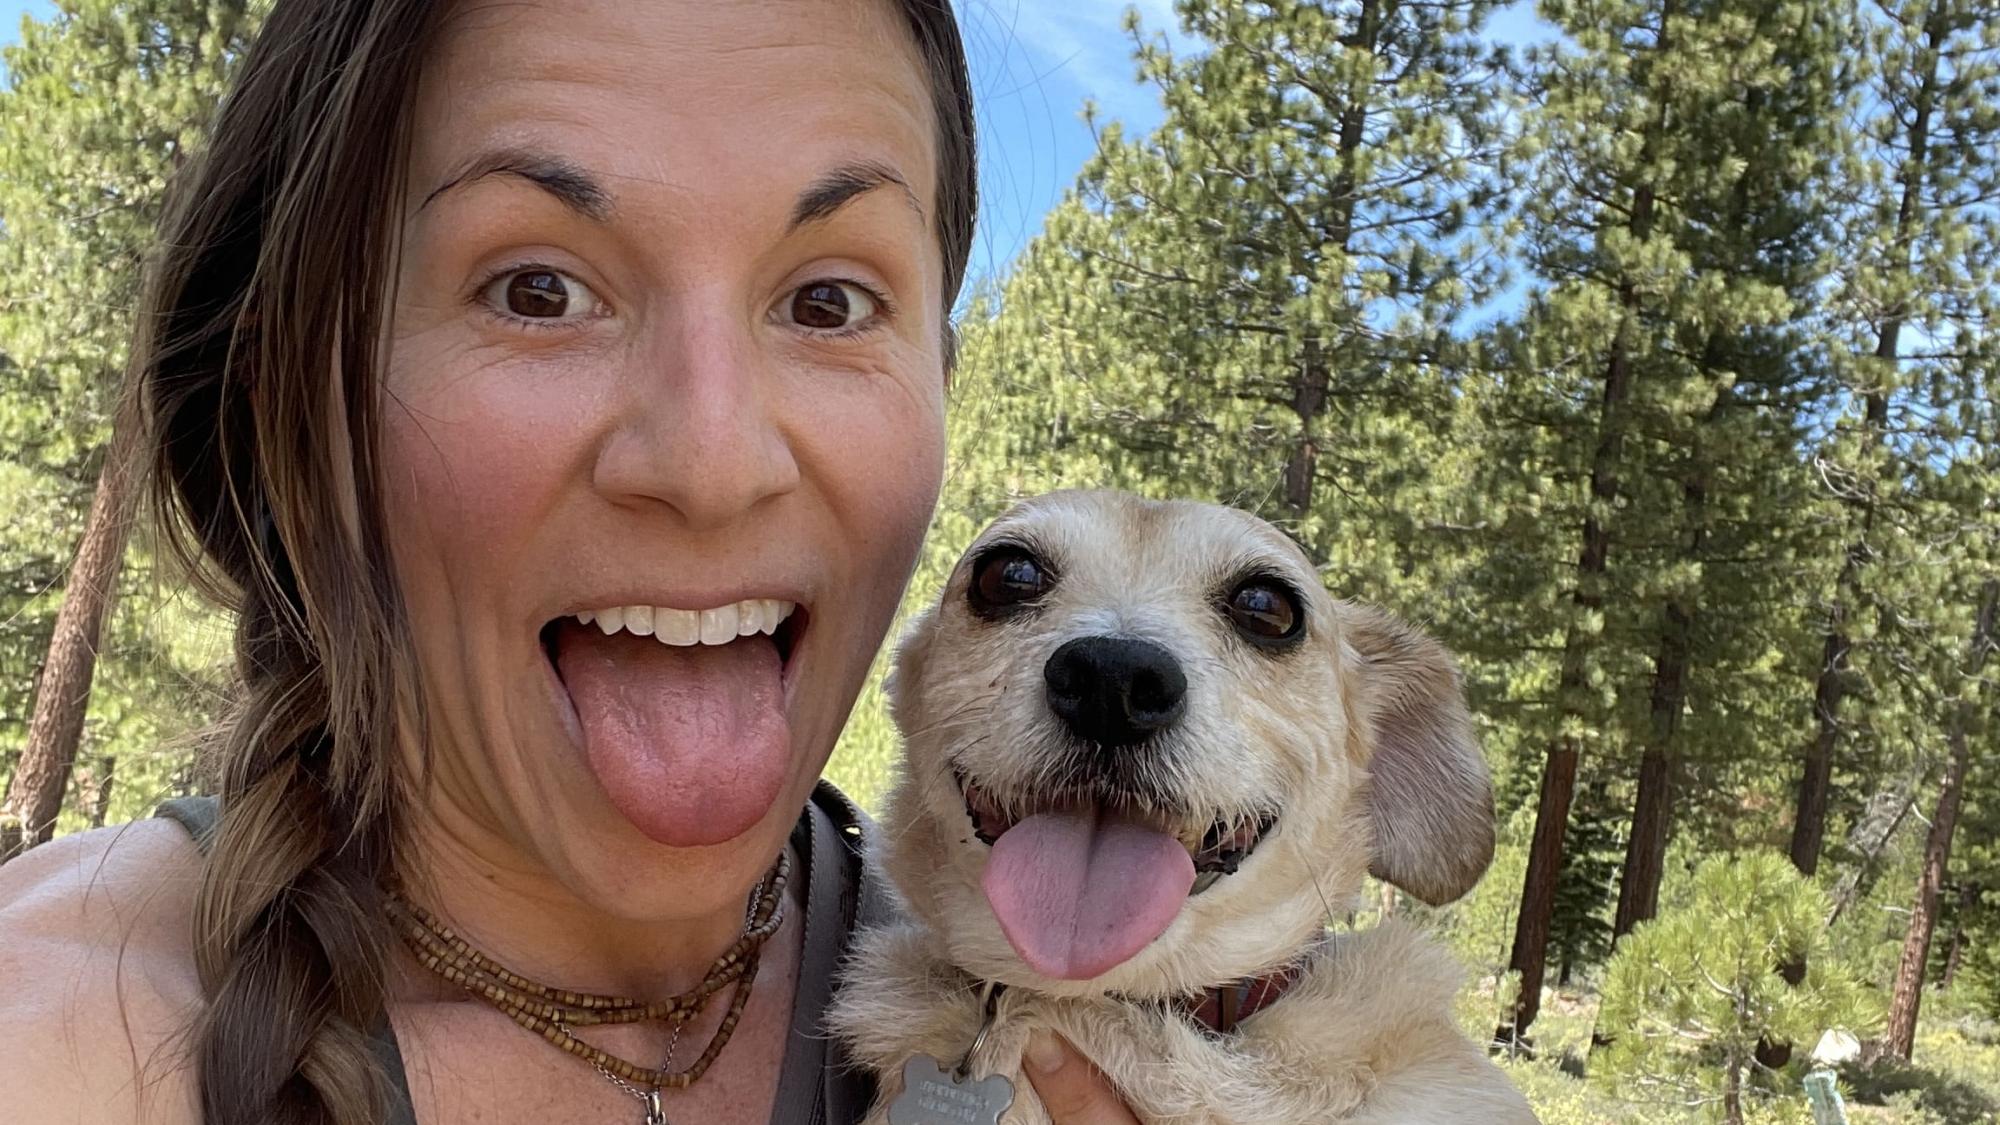 Sarah Miller and her dog taking a photo while hiking.